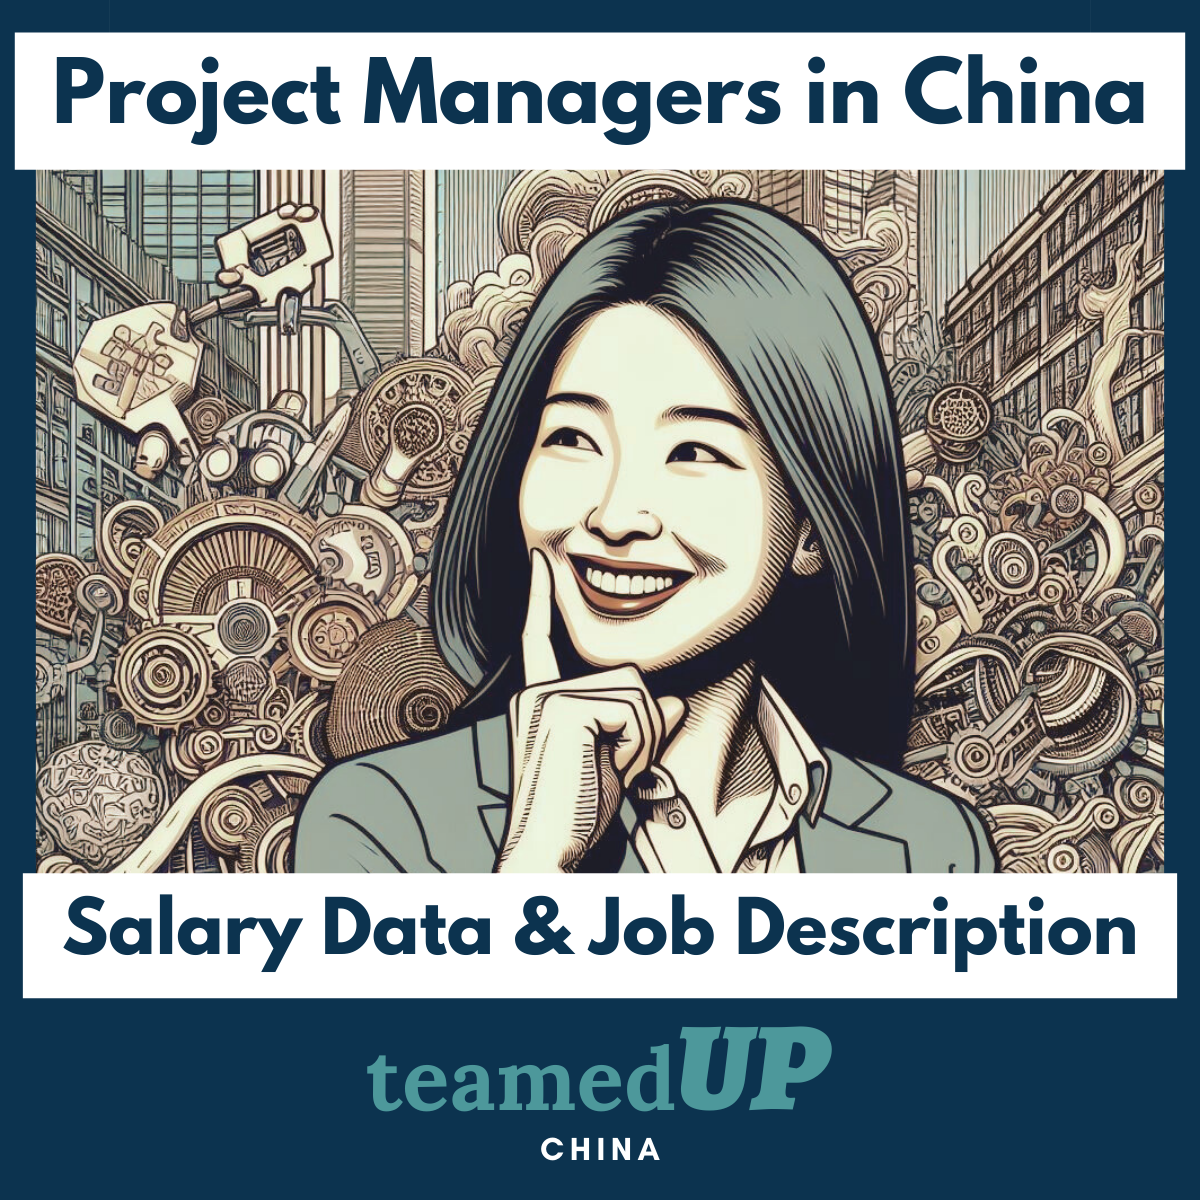 Project Managers in China - Average Salary and JD - TeamedUp China